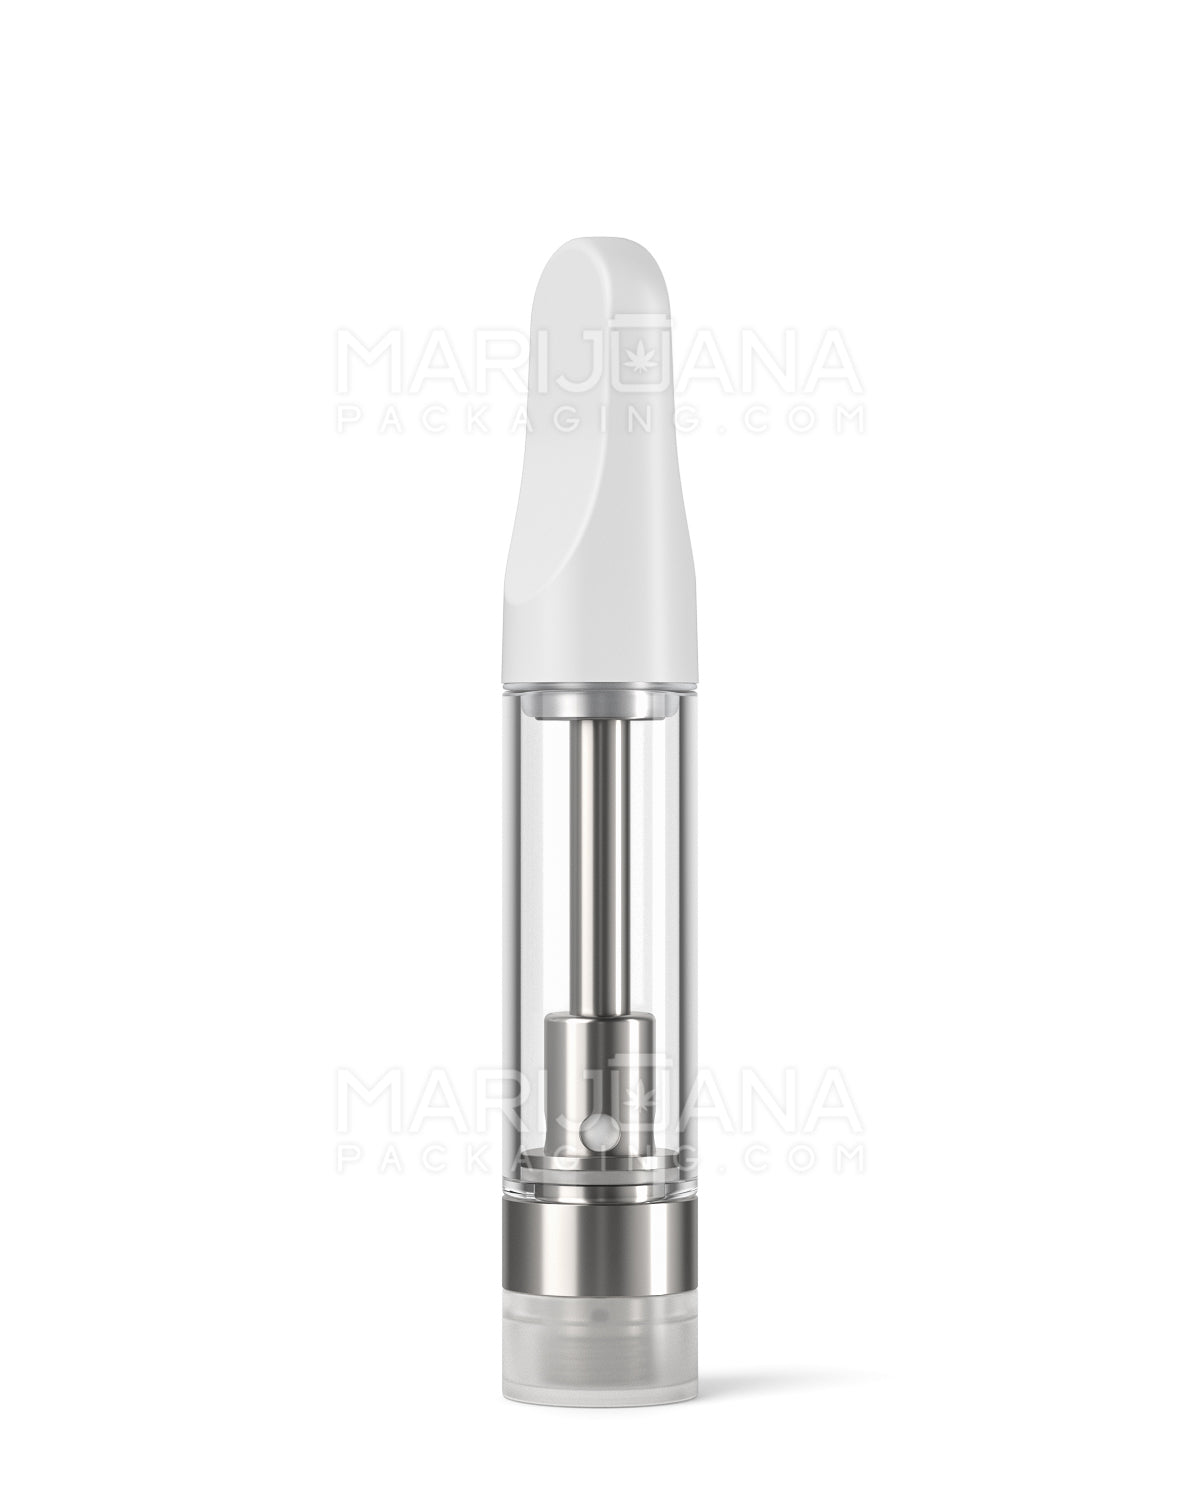 CCELL | Liquid6 Reactor Glass Vape Cartridge with White Plastic Mouthpiece | 1mL - Screw On - 100 Count - 3